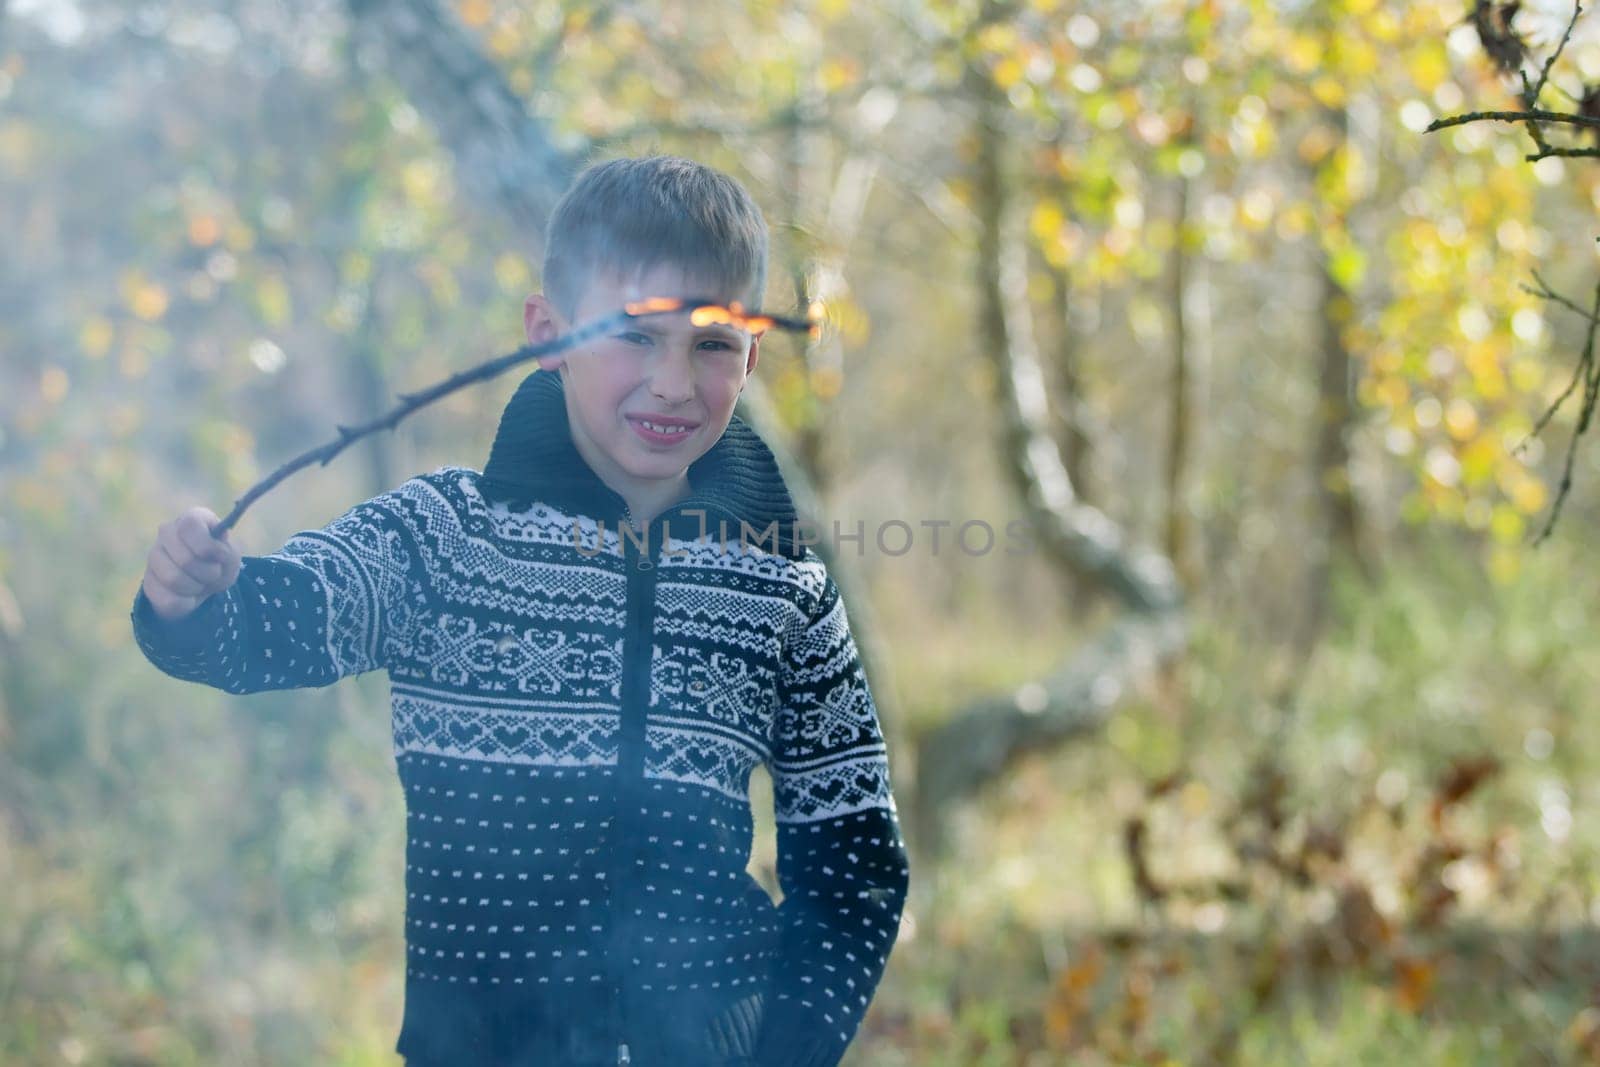 The boy is holding a burning wooden branch.